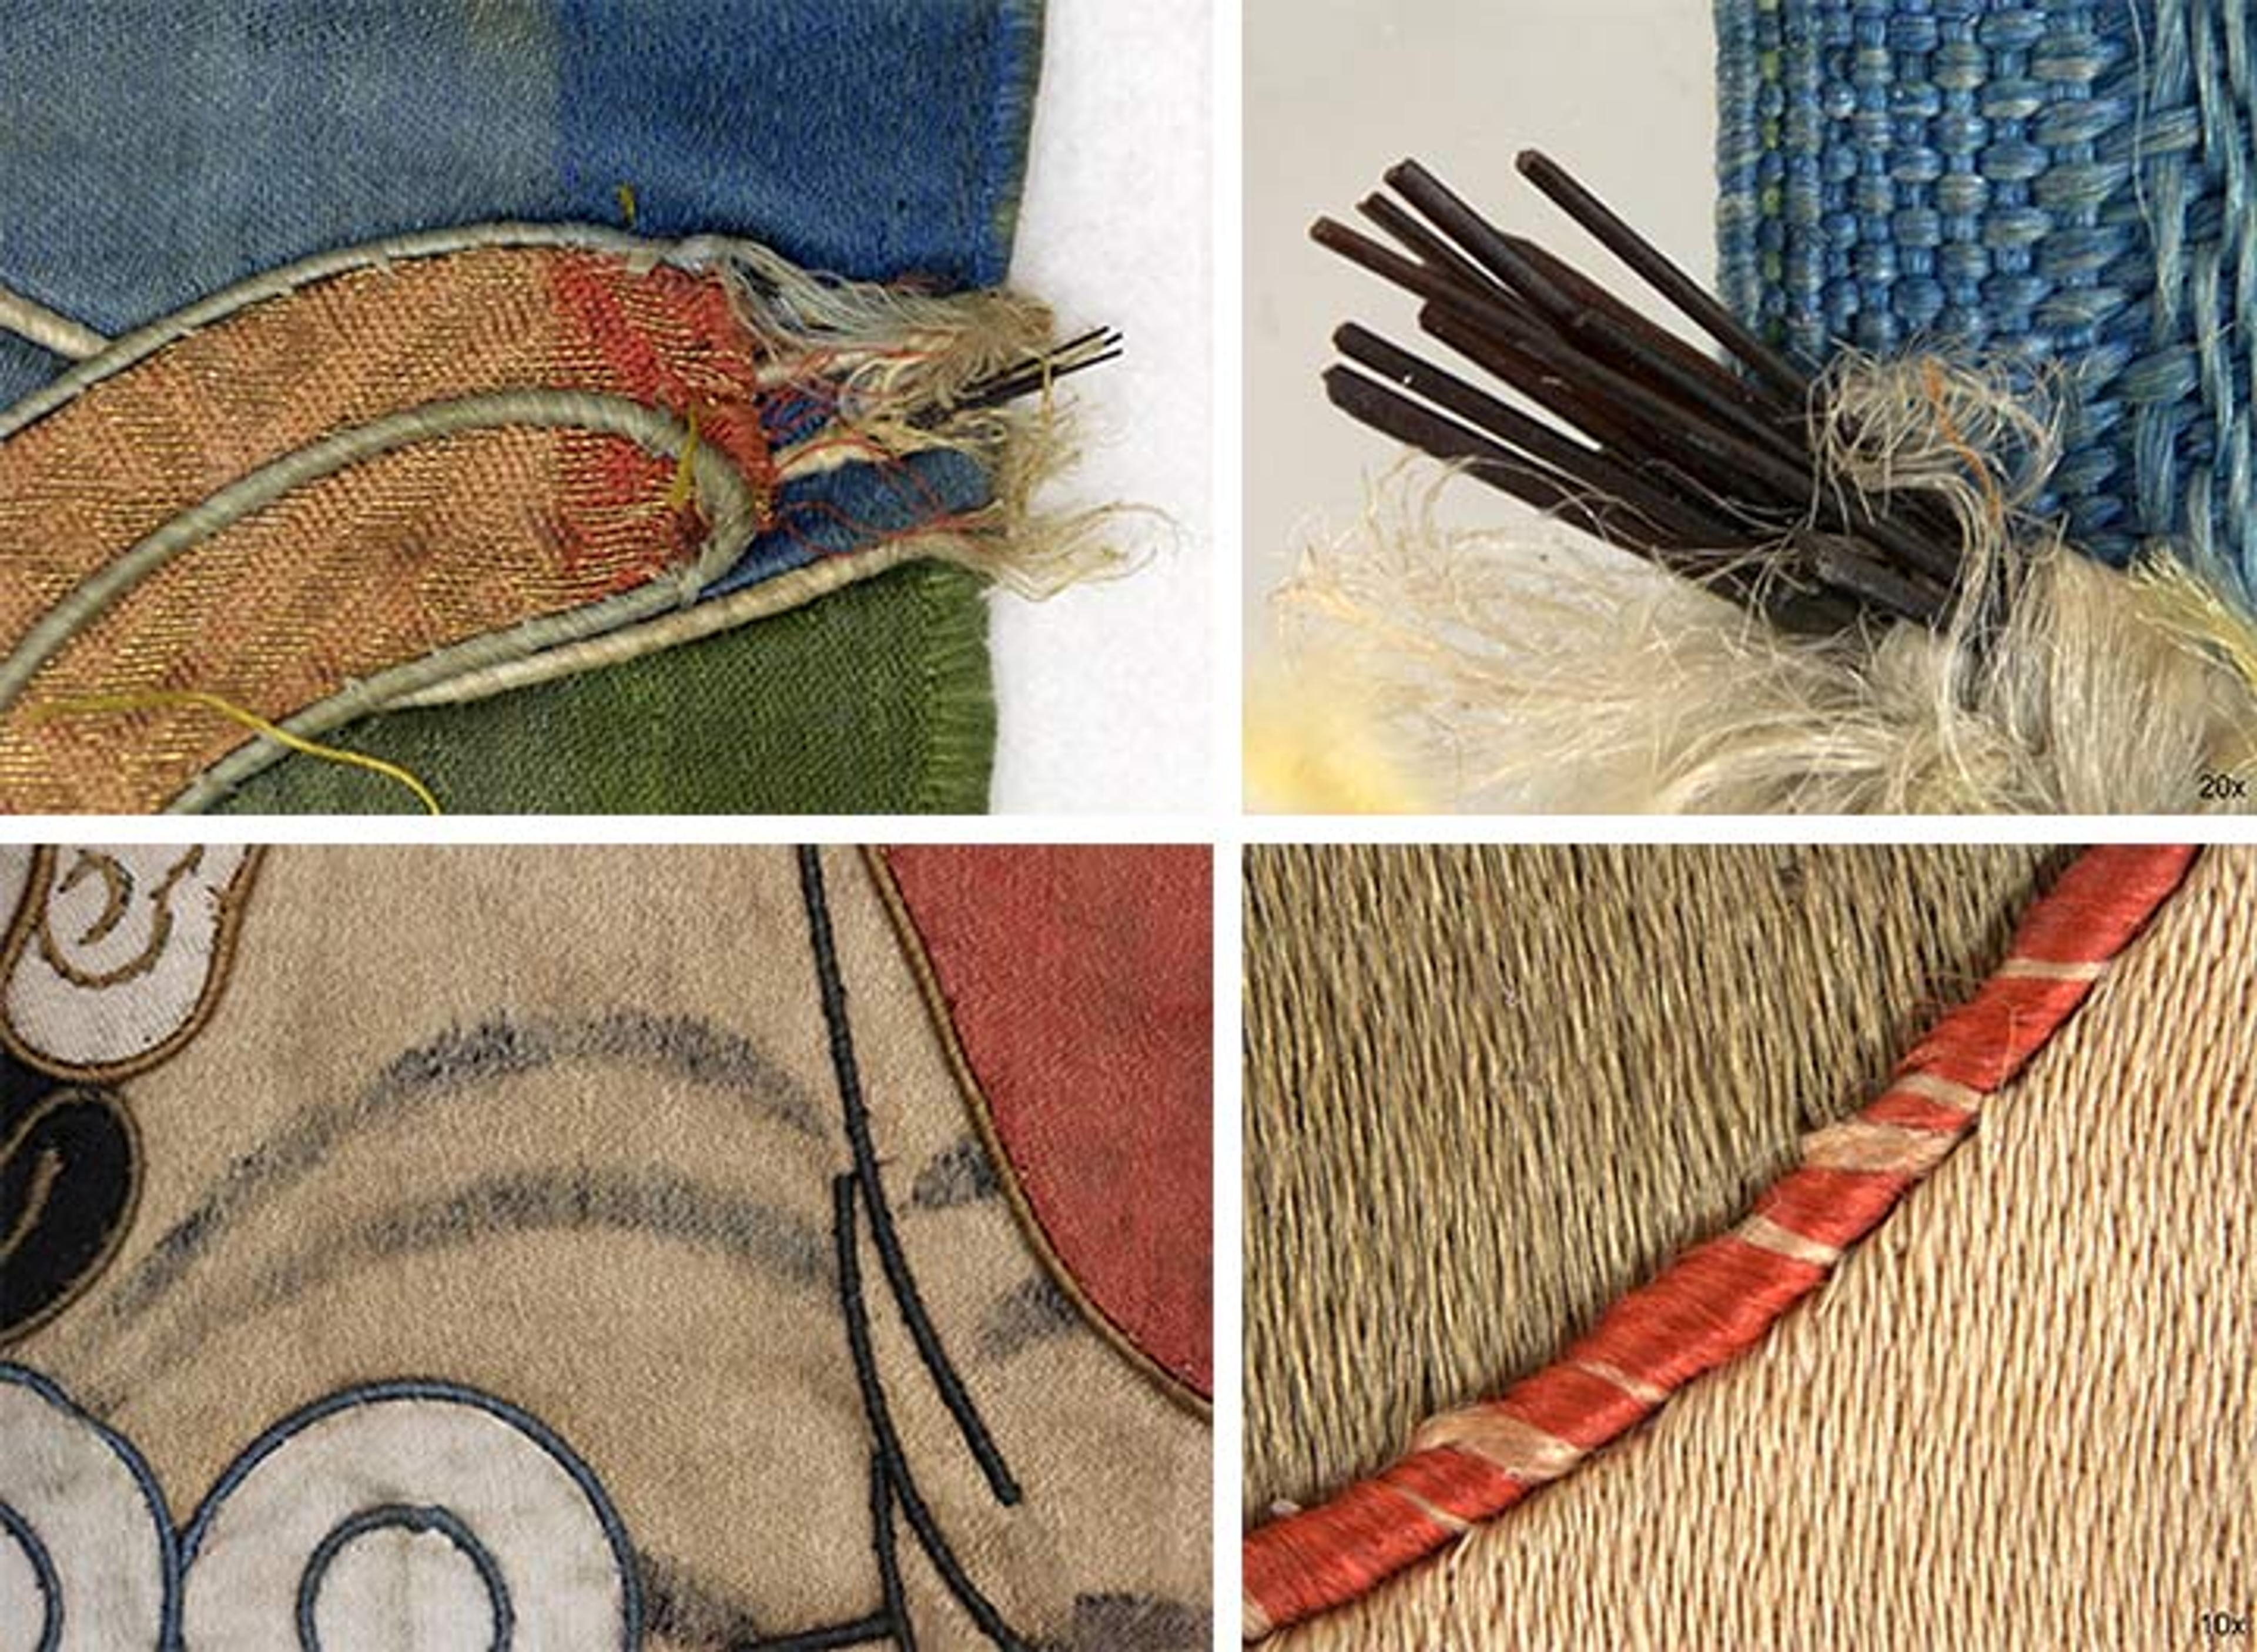 On left, details of fabrics; on right, close-ups